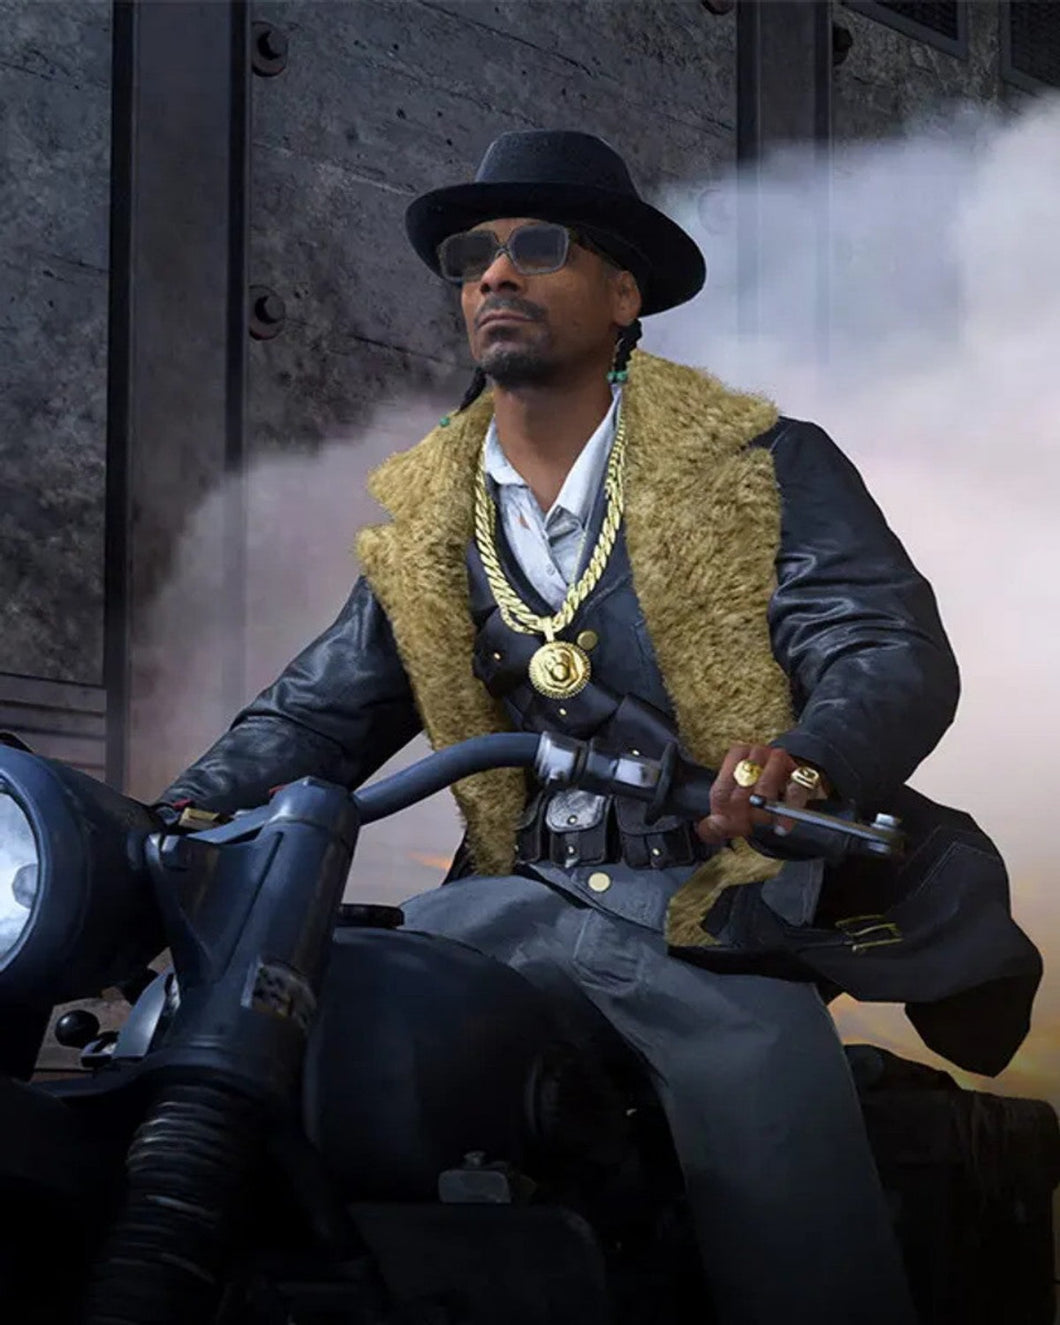 Snoop Dogg Video Game Call of Duty Black Shearling Leather Coat